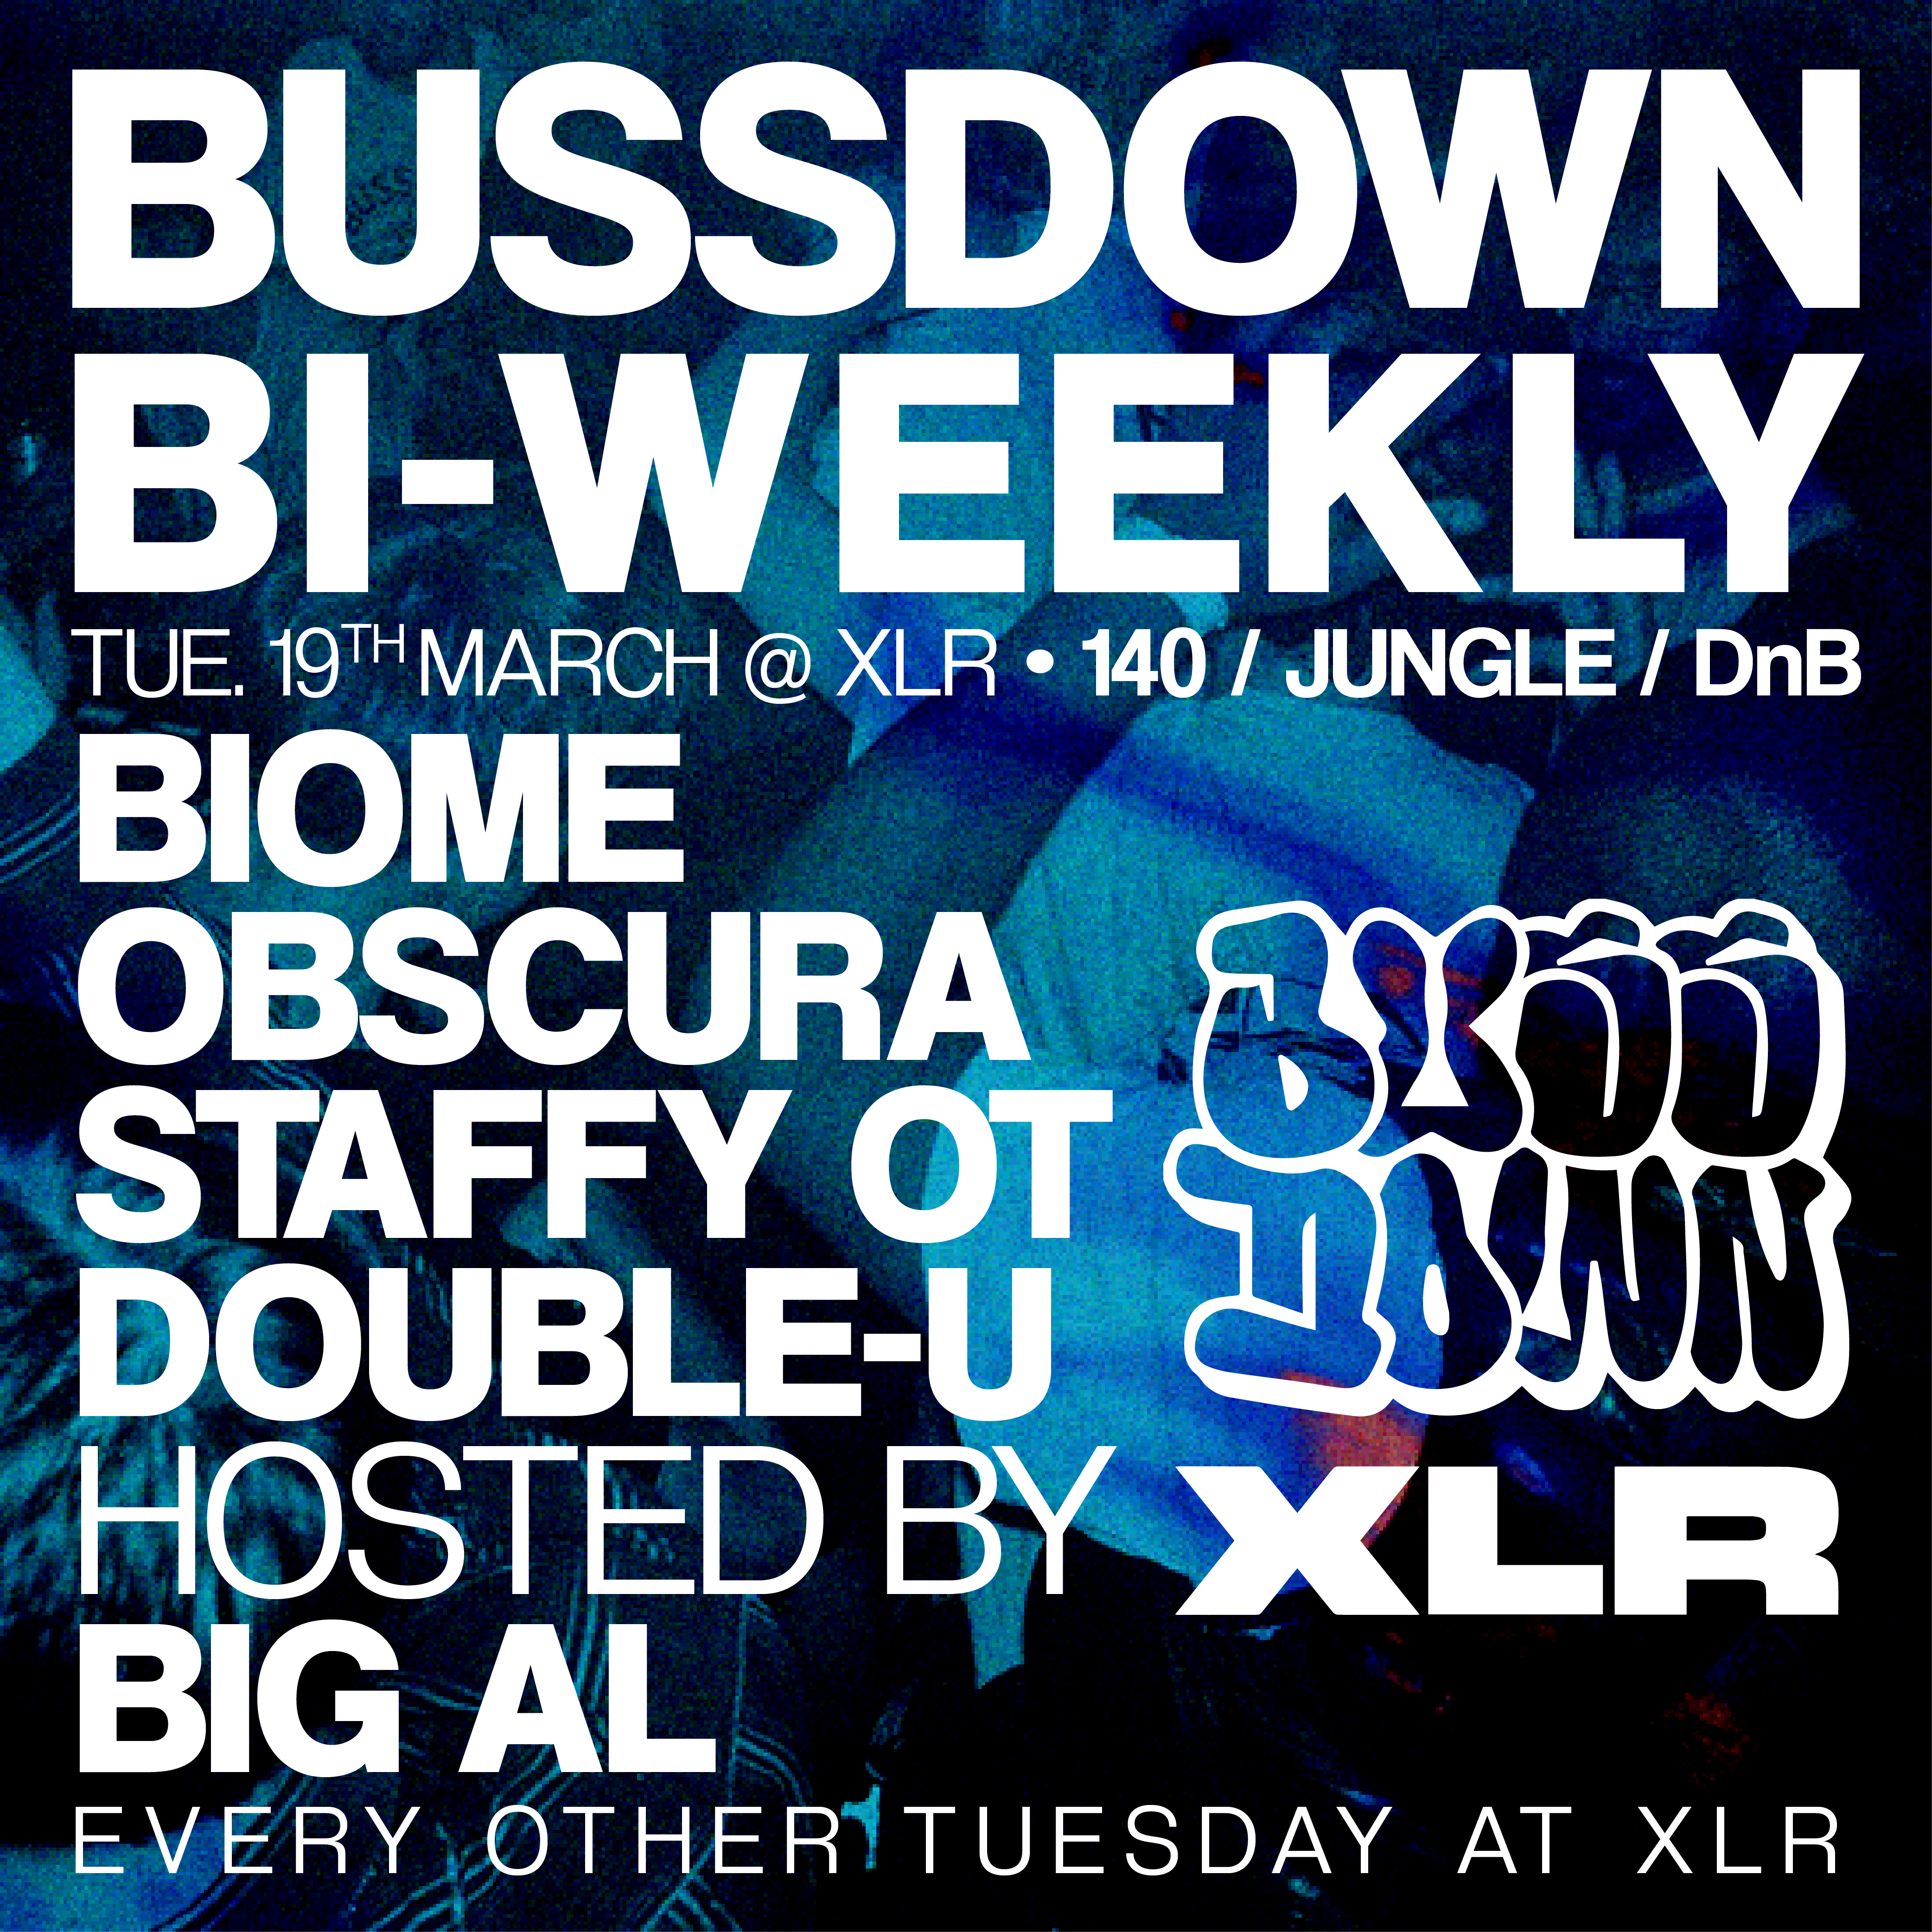 BUSSDOWN Bi-Weekly - Biome, OBSCURA + MORE - フライヤー表